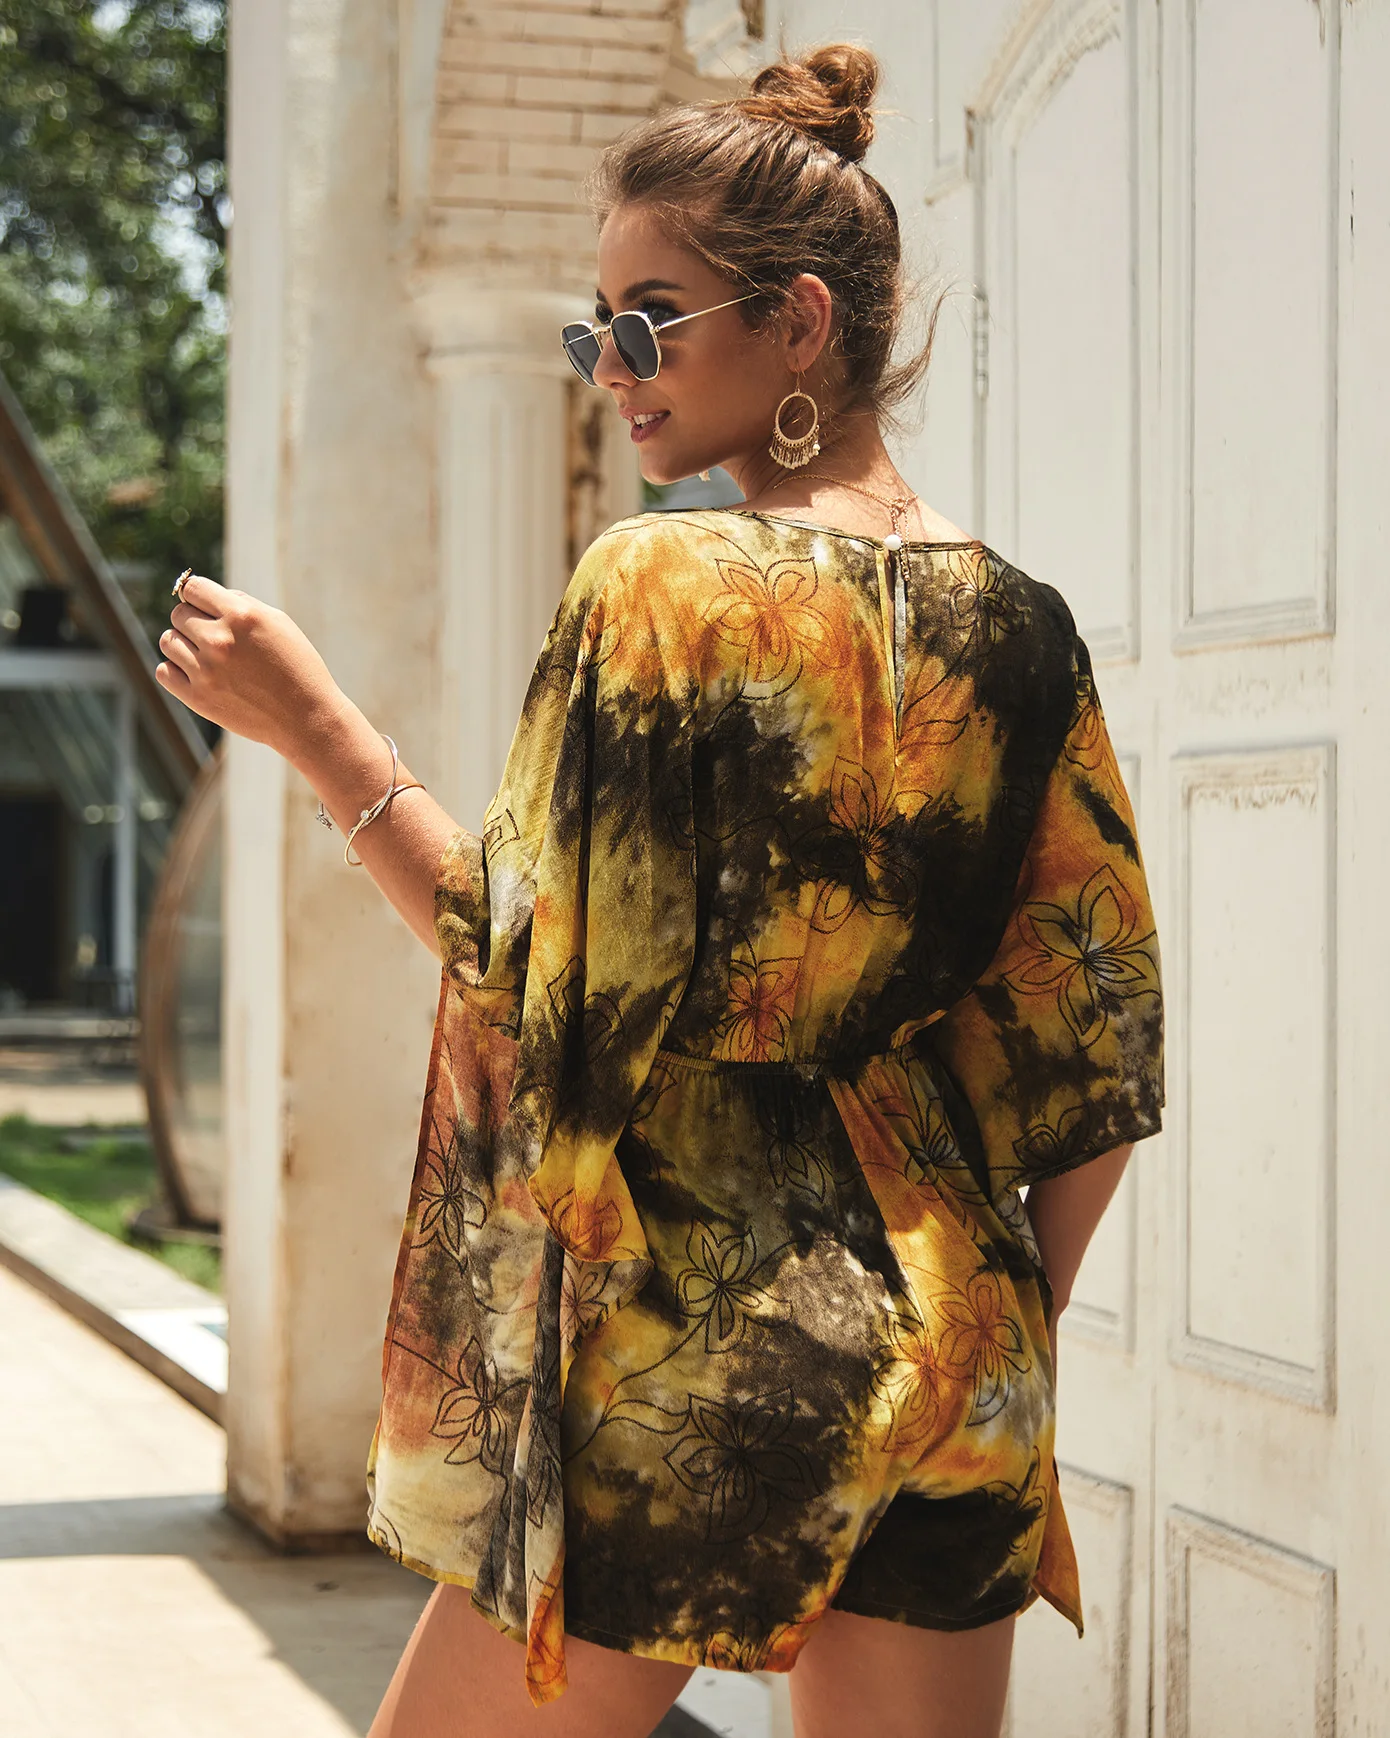 

ZOGAA Bohemian Batwing Sleeve Floral Print Belt Women Summer Beach Vocation V Neck Sexy Jumpsuit Short Overalls Casual Playsuit